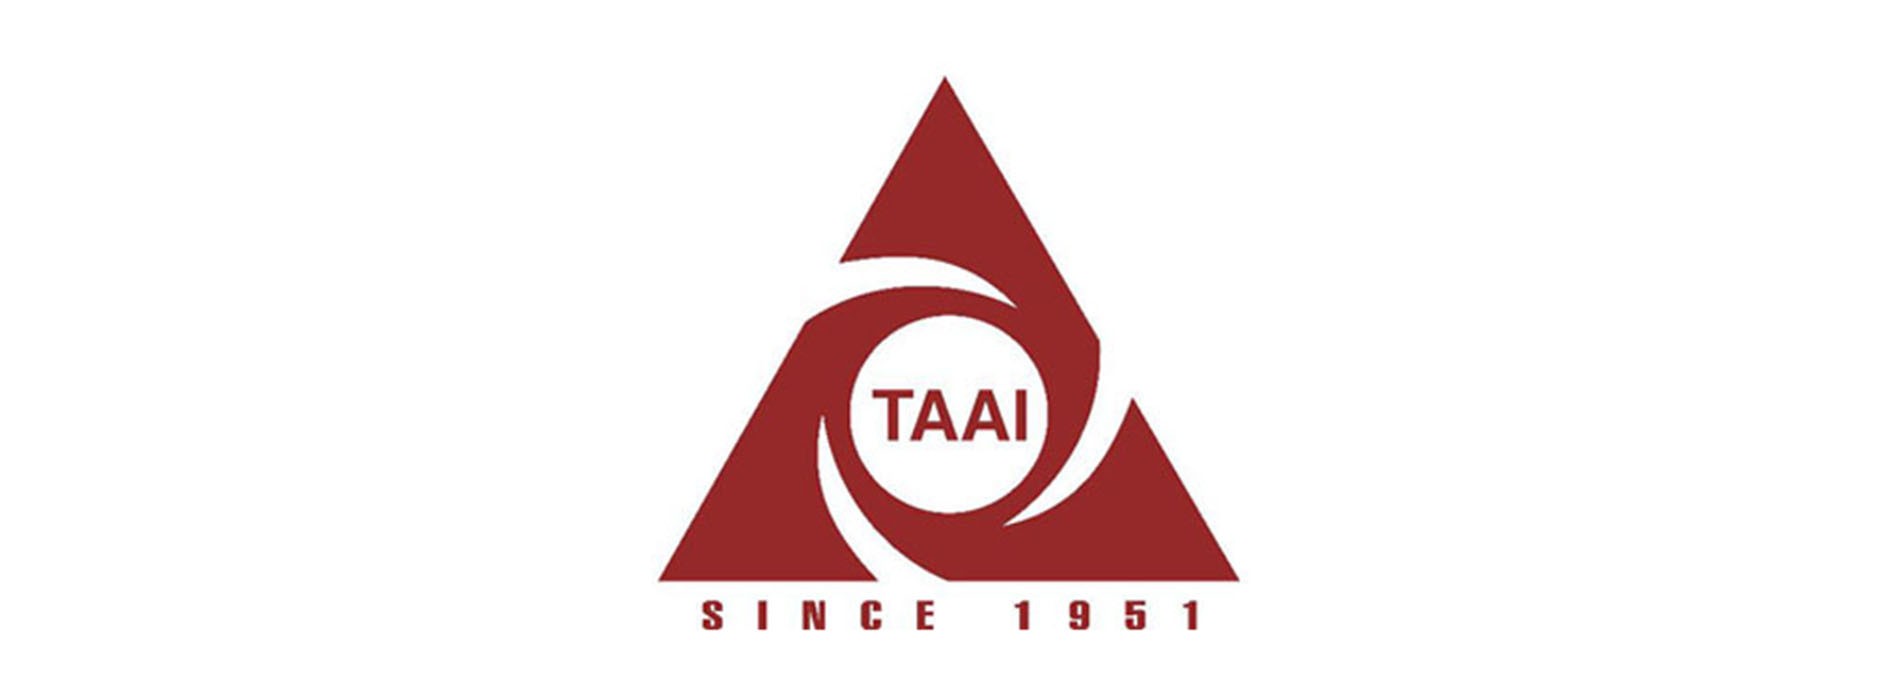 Travel and Tourism ignored once again: TAAI to FM: Budget 2022